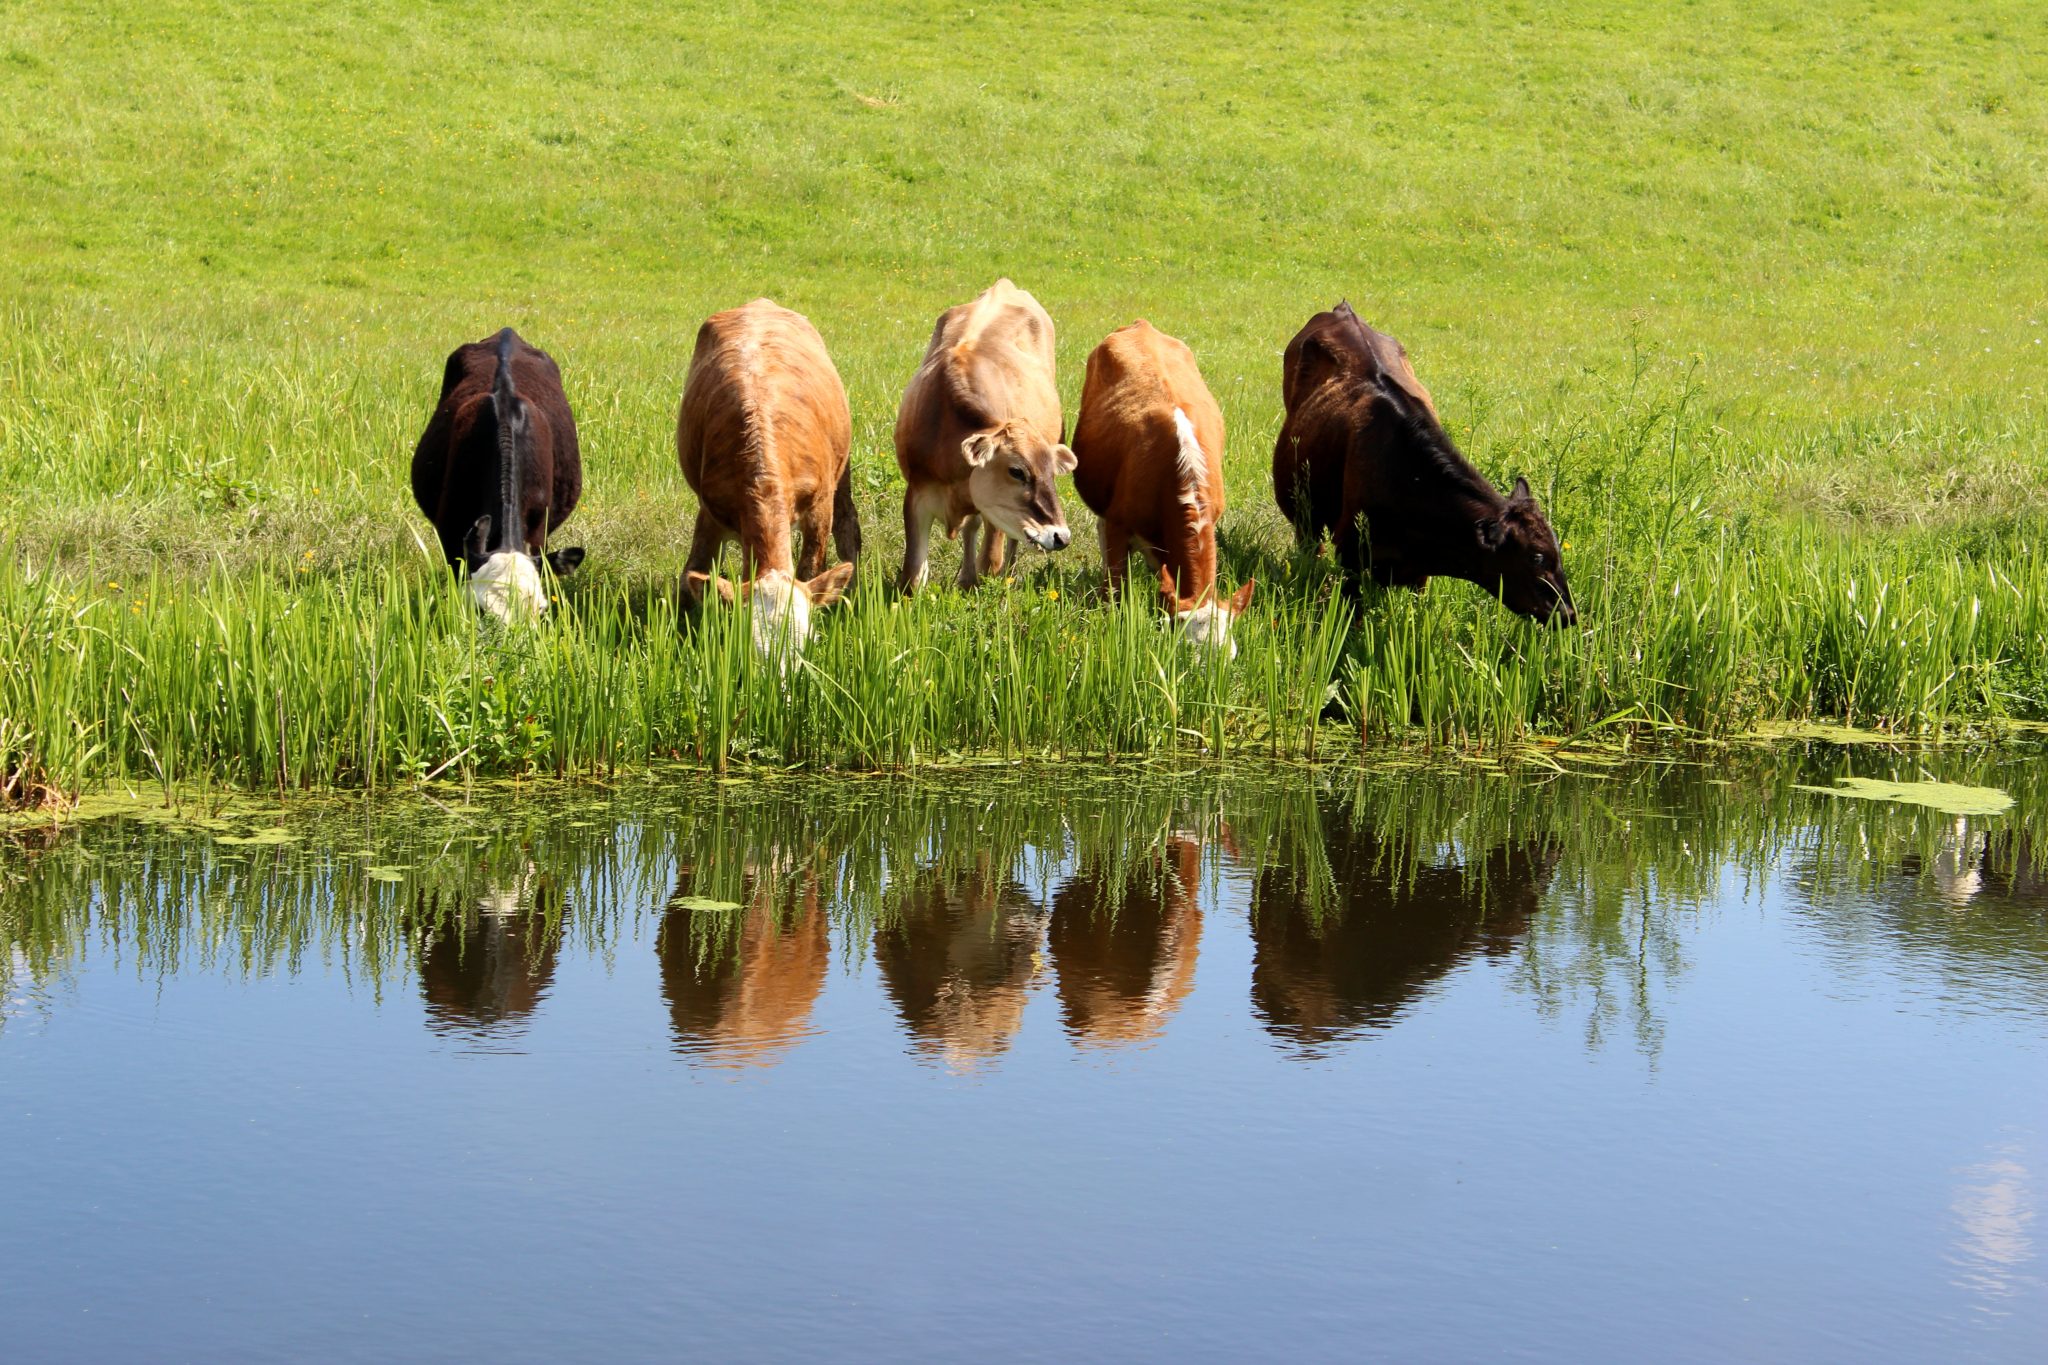 Cows drinking from a pond.